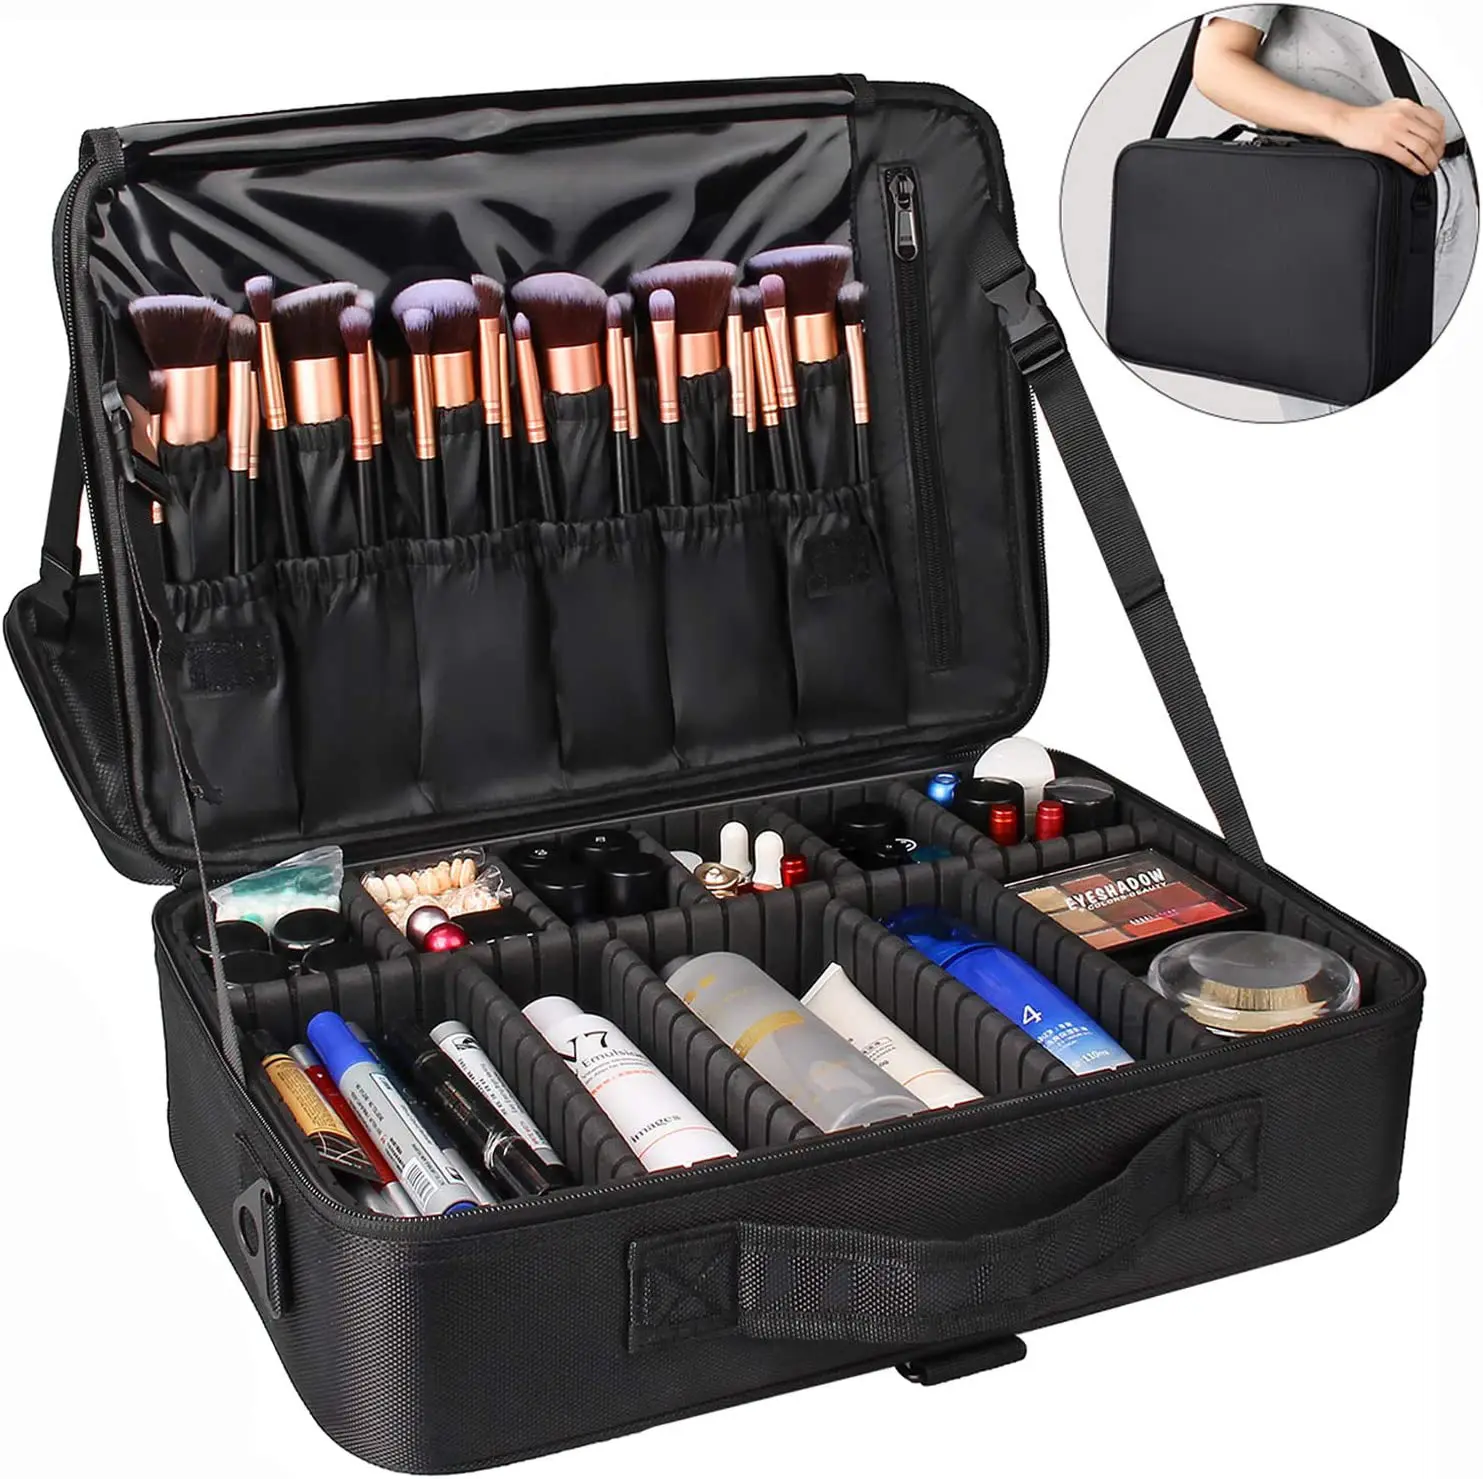 Hot Artist Carrying Case Travel Vanity Jewelry Digital Accessories Adjustable Partition makeup storage bag